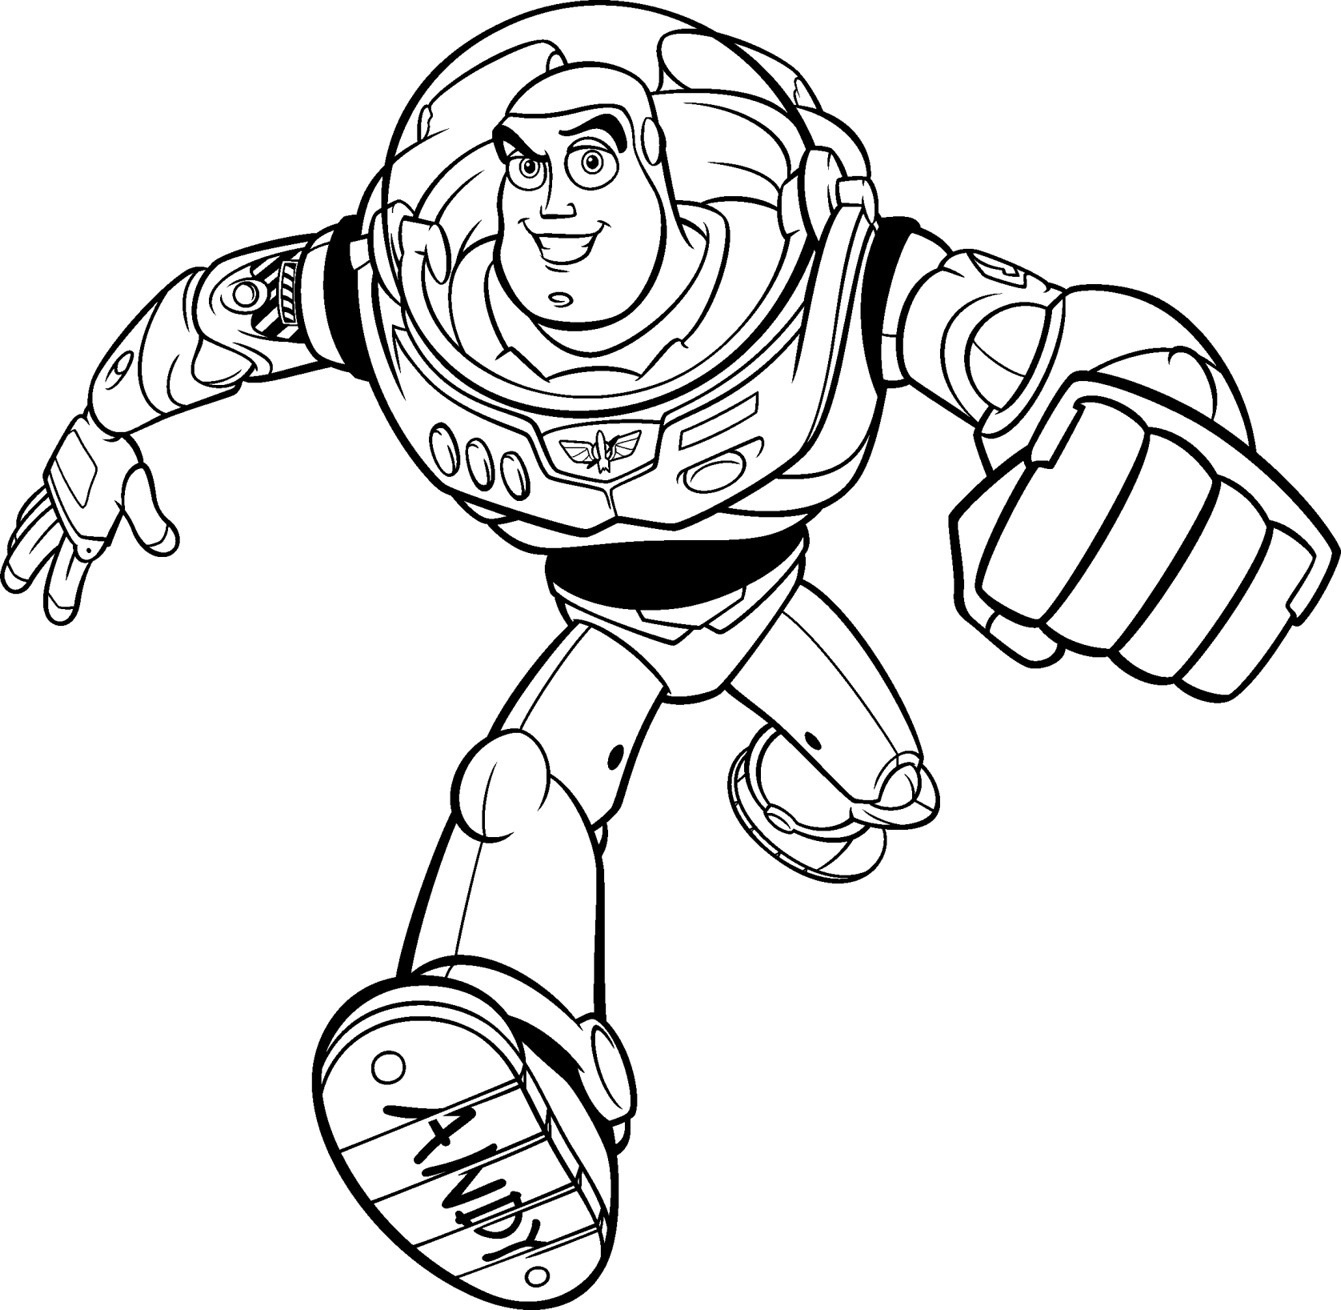 Coloring Pages for everyone: Toy Story